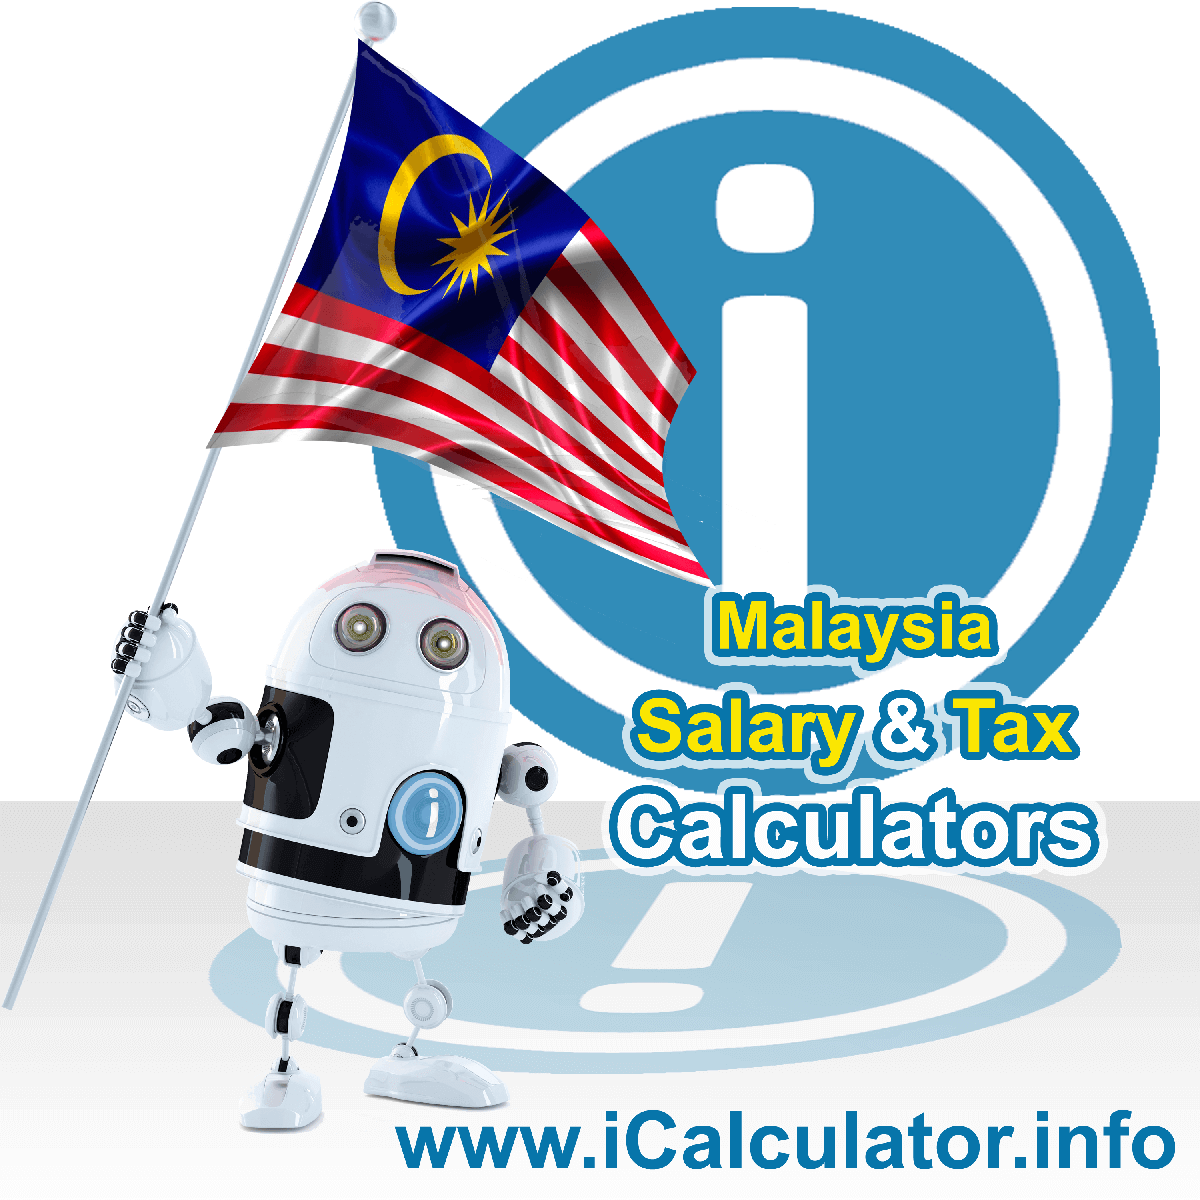 Malaysia Wage Calculator. This image shows the Malaysia flag and information relating to the tax formula for the Malaysia Tax Calculator